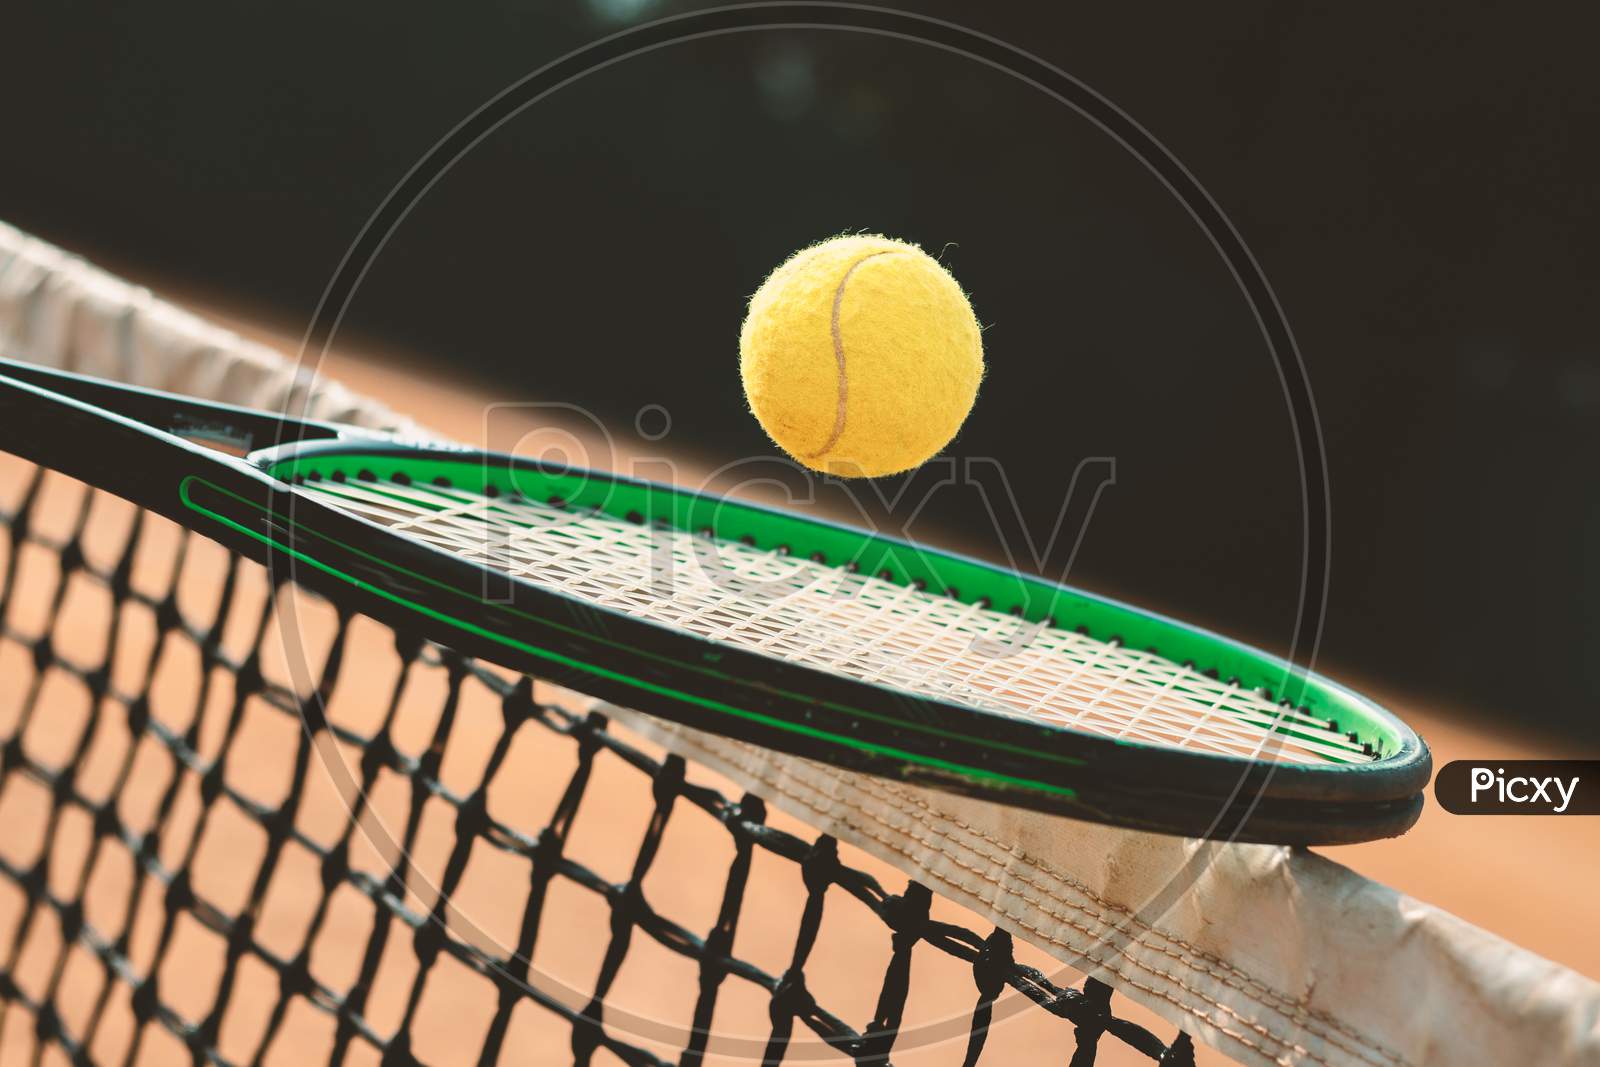 Tennis Racket And A Ball In A Court